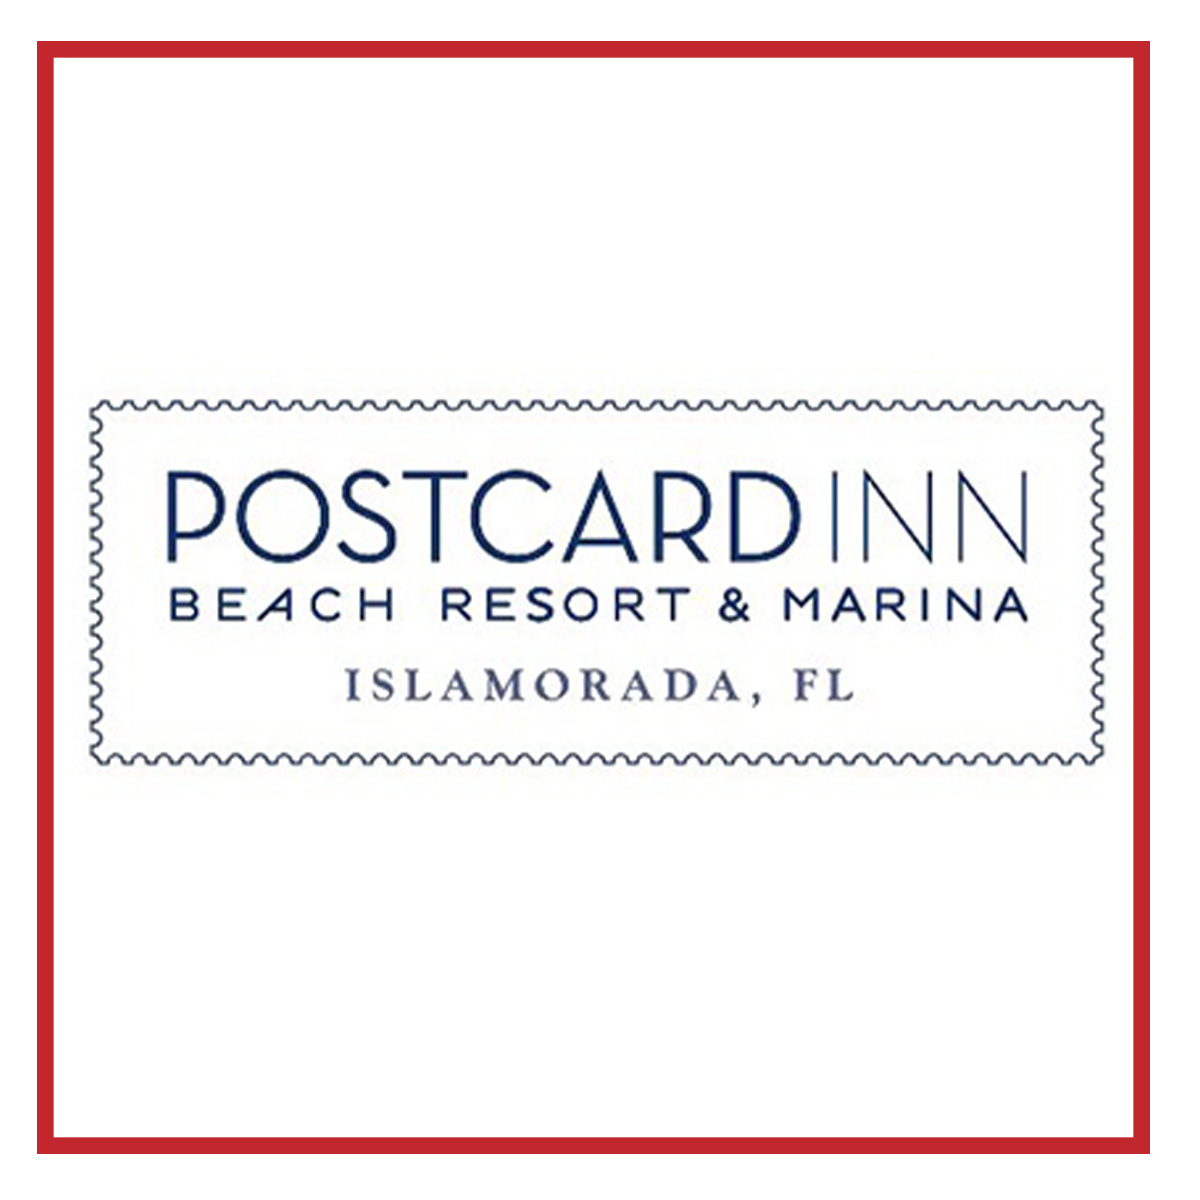 You are currently viewing Postcard Inn Beach Resort & Marina